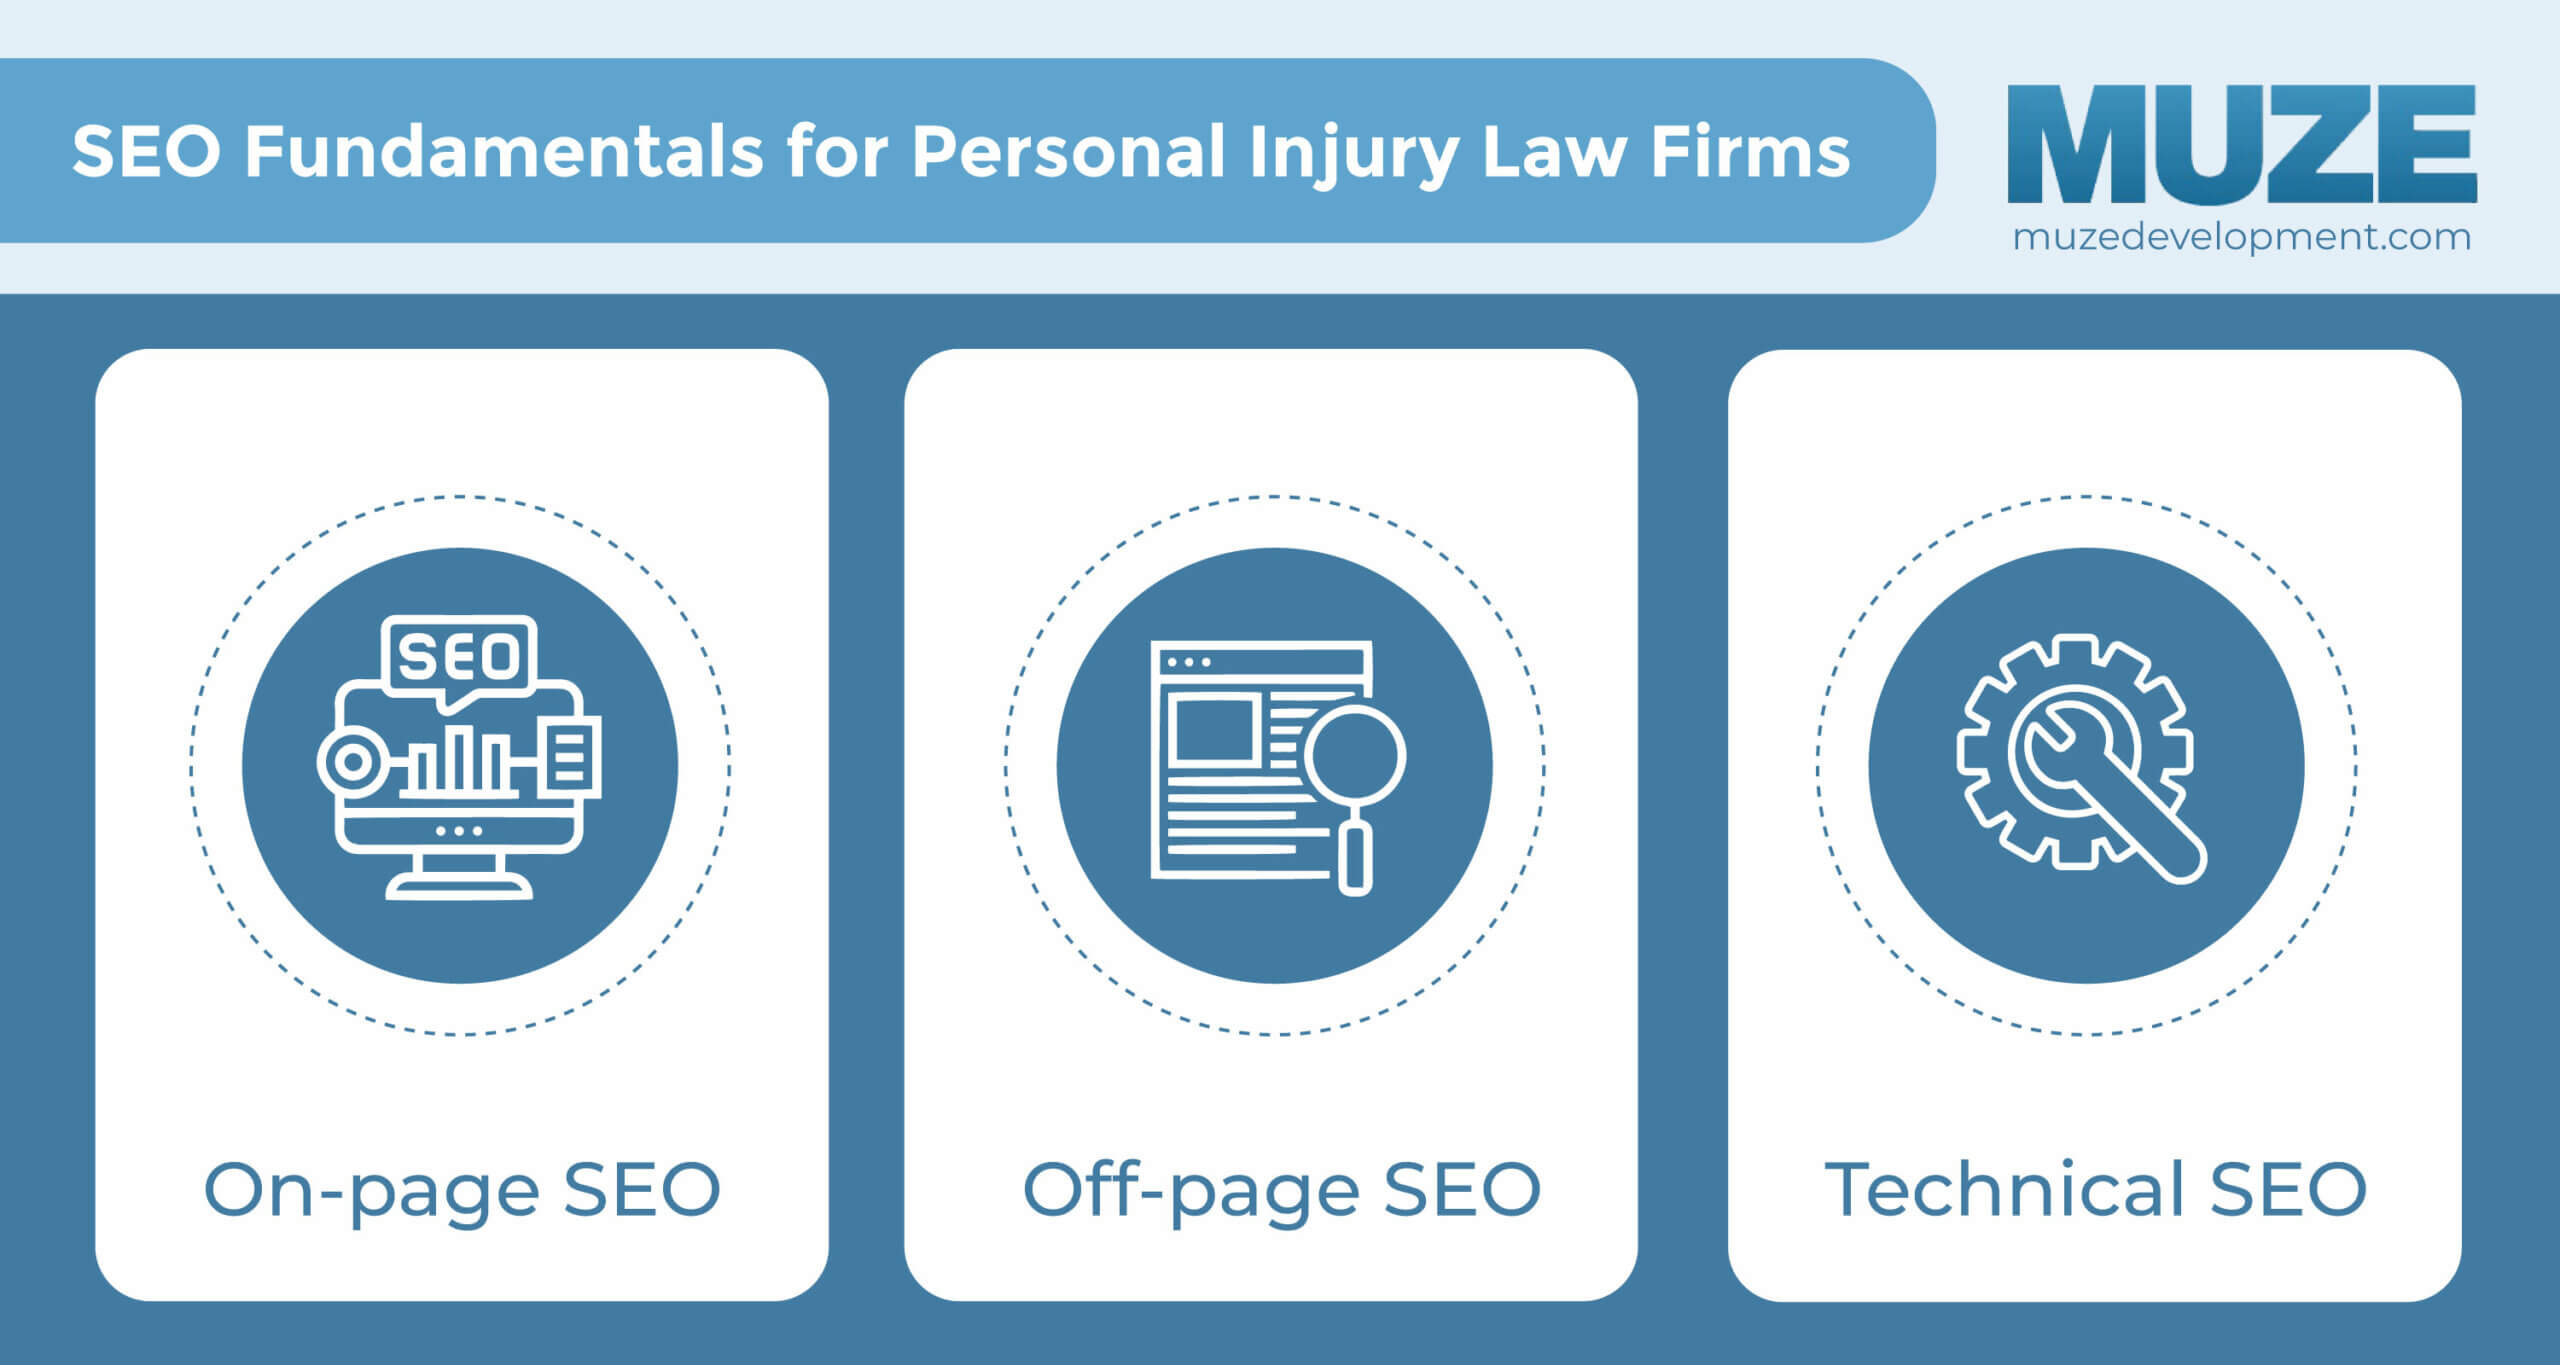 SEO Fundamentals for Personal Injury Law Firms